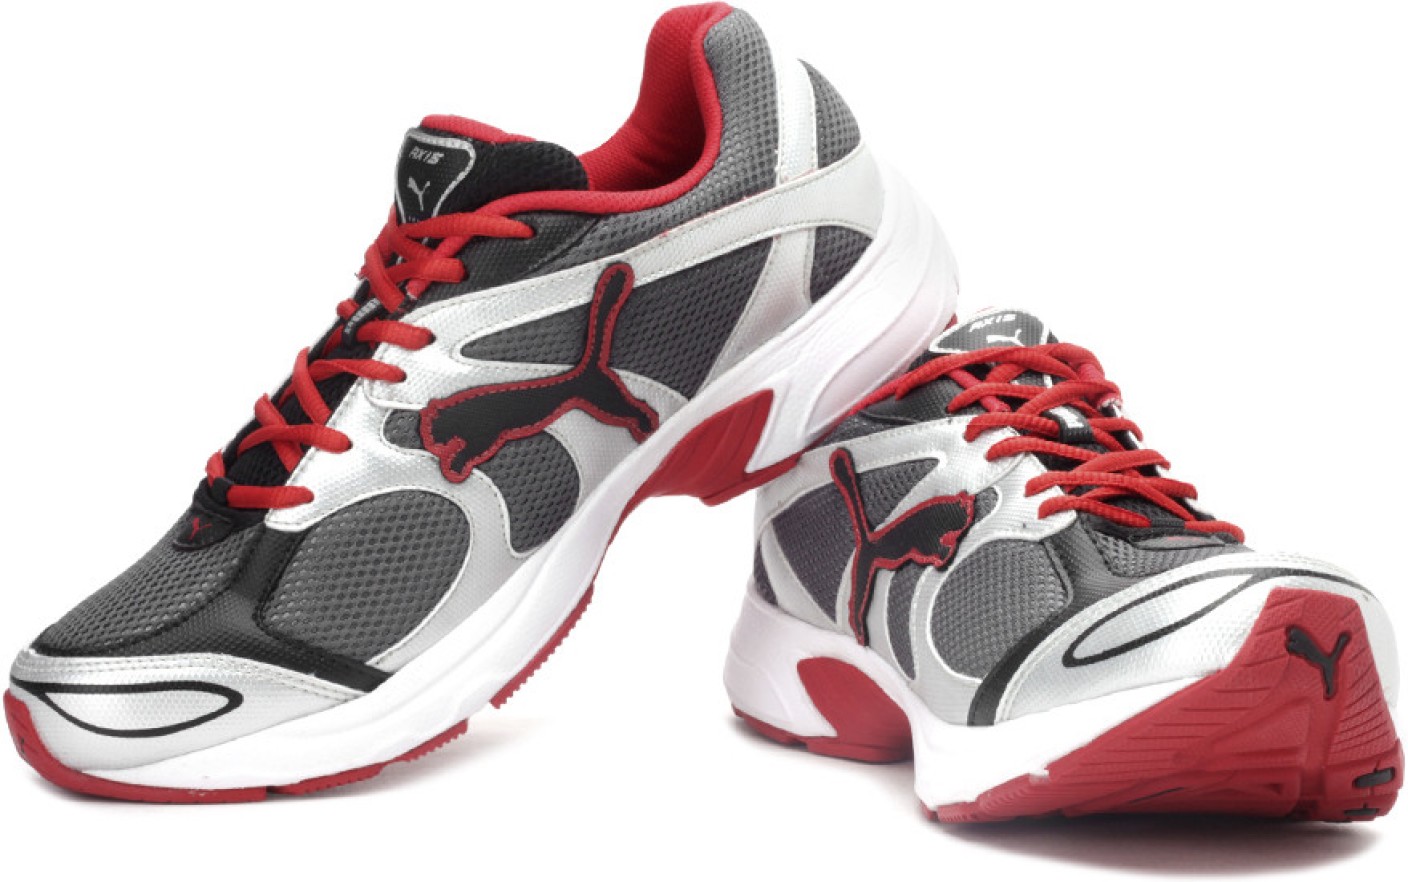 Puma Axis III Ind. Men Running Shoes For Men - Buy Black, Puma Silver, Red Color Puma Axis III ...